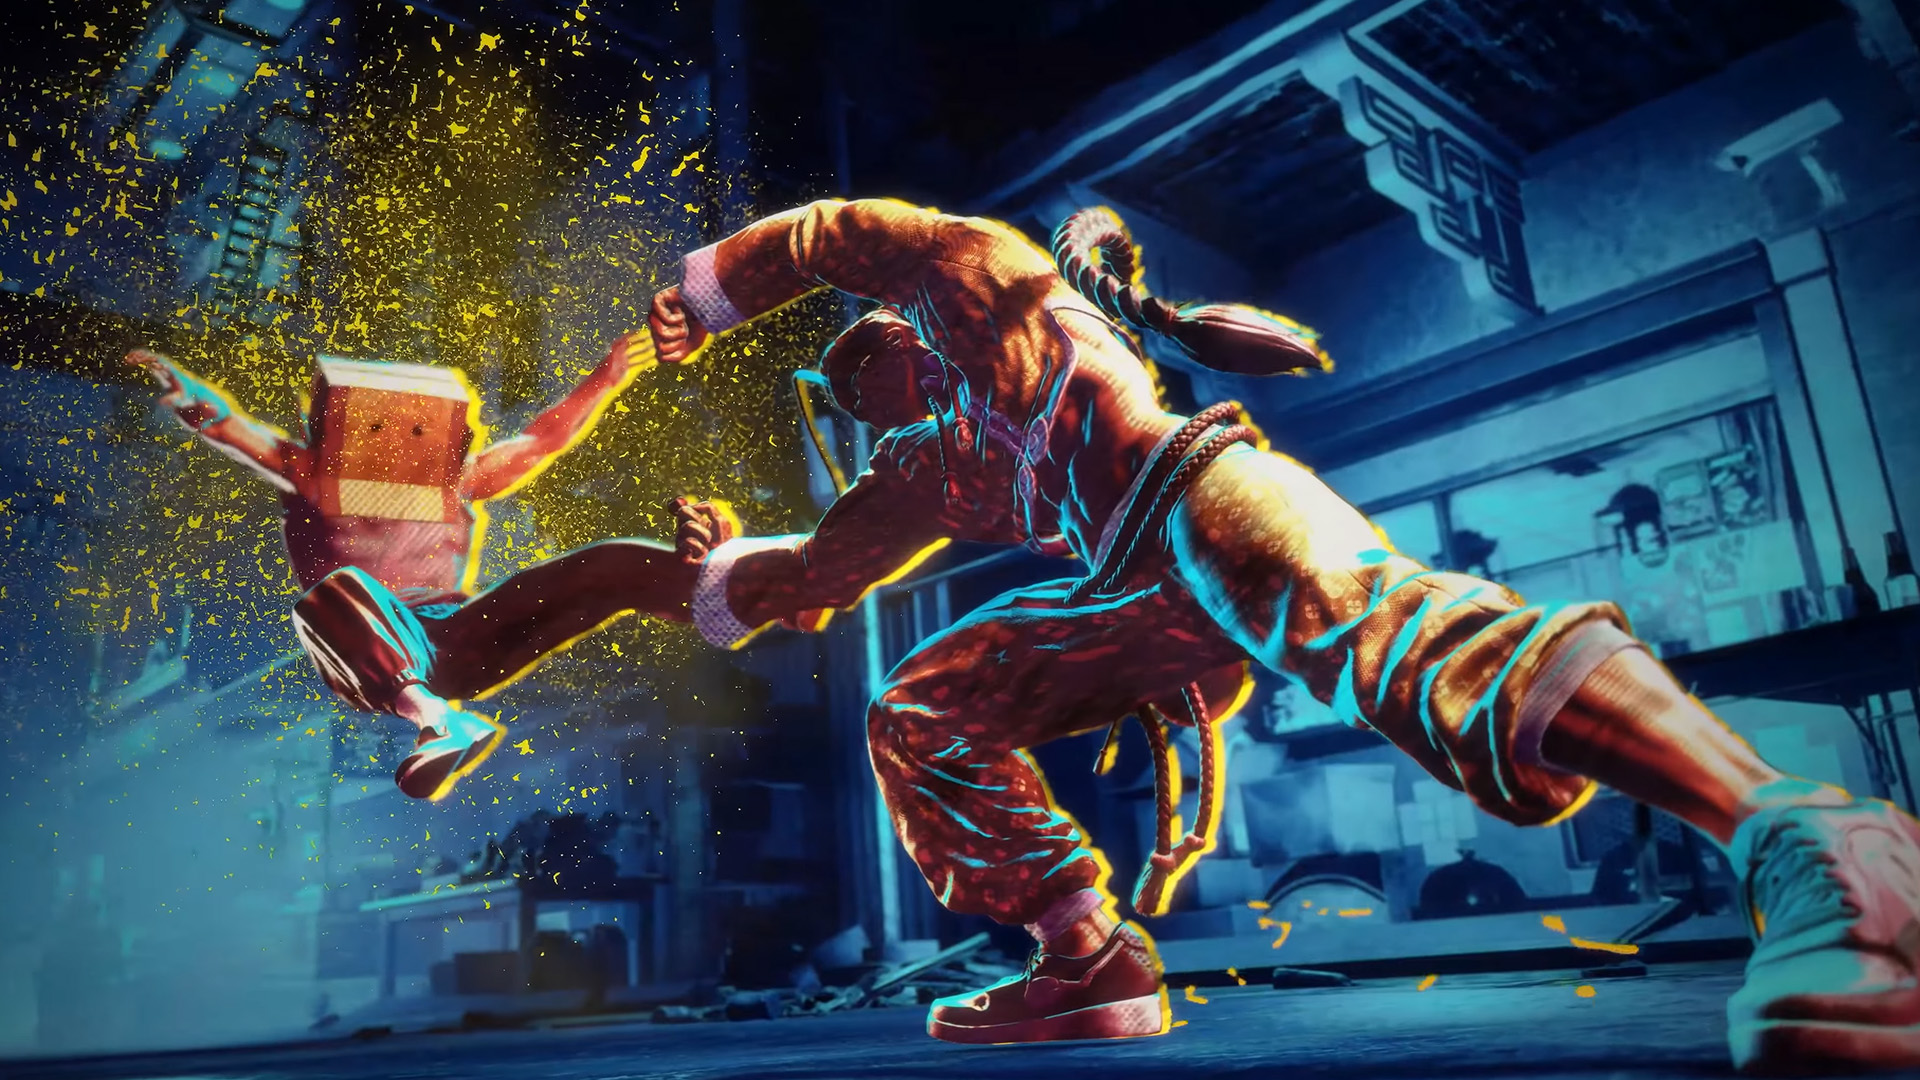 Street Fighter 6 Release Date, New Characters, and Modes Showcased